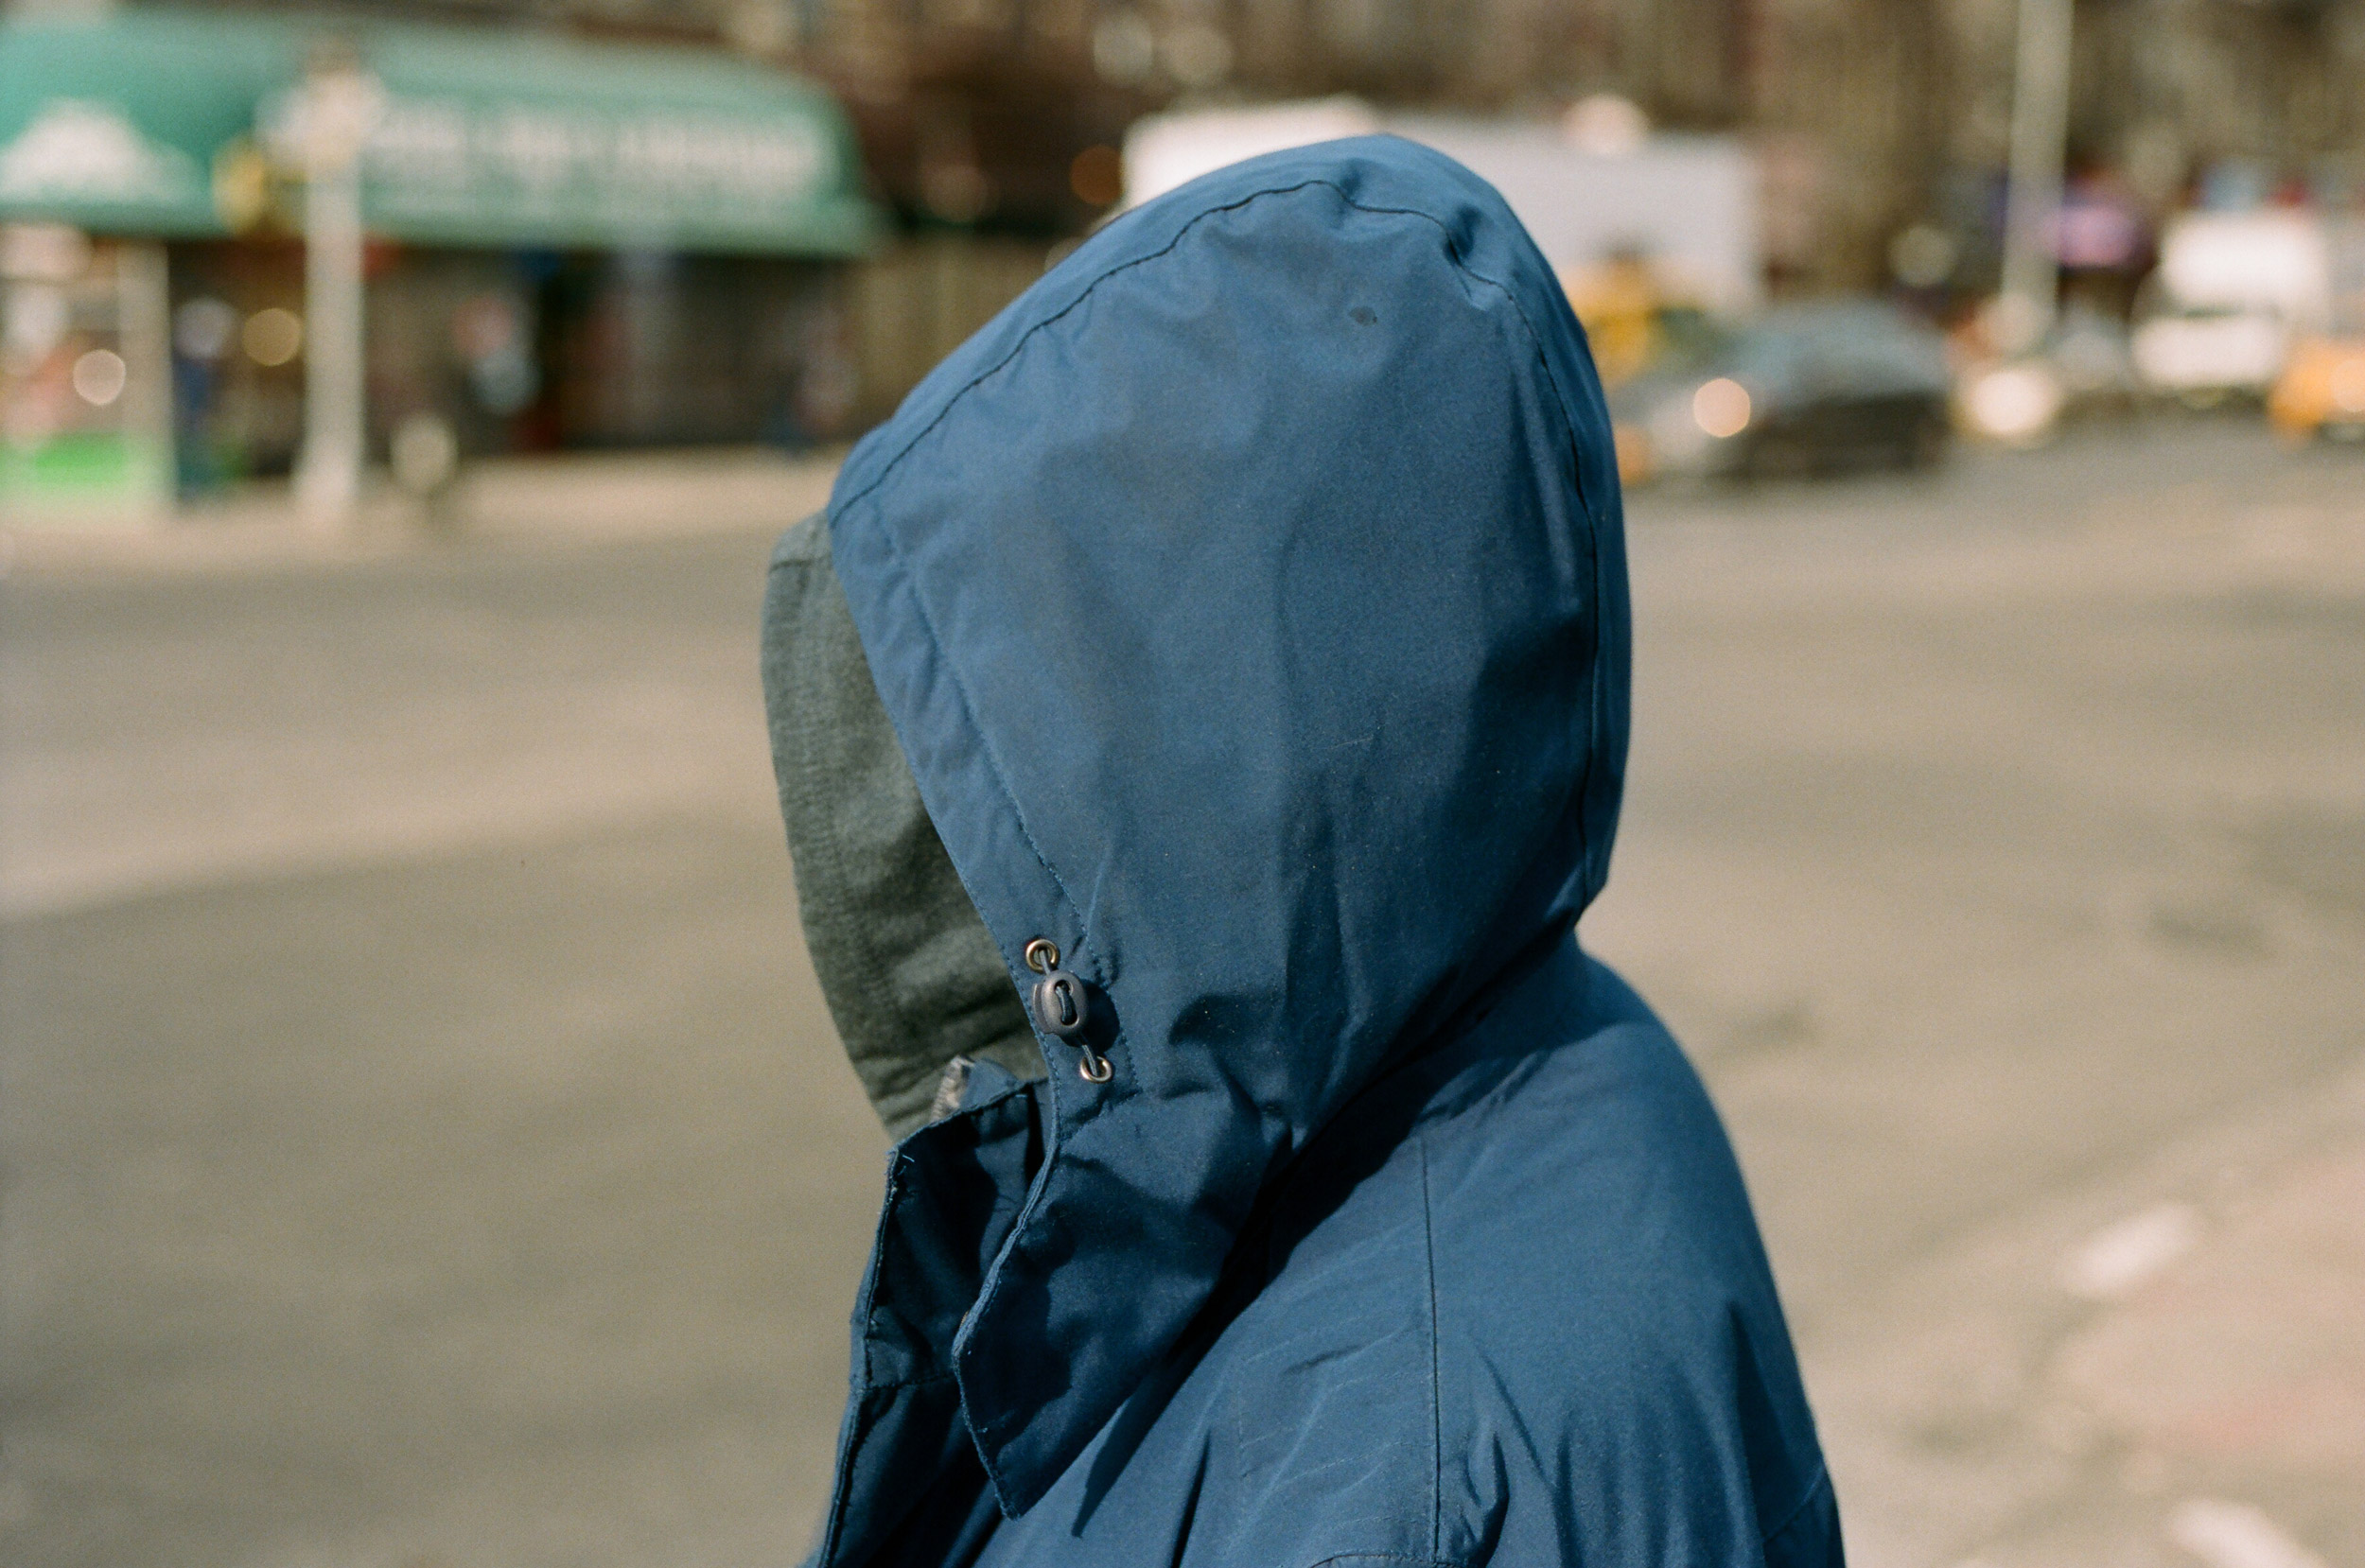 A-SIDE-PROFILE-OF--MAN-IN-A-HOOD-IN-NEW-YORK-CITY-